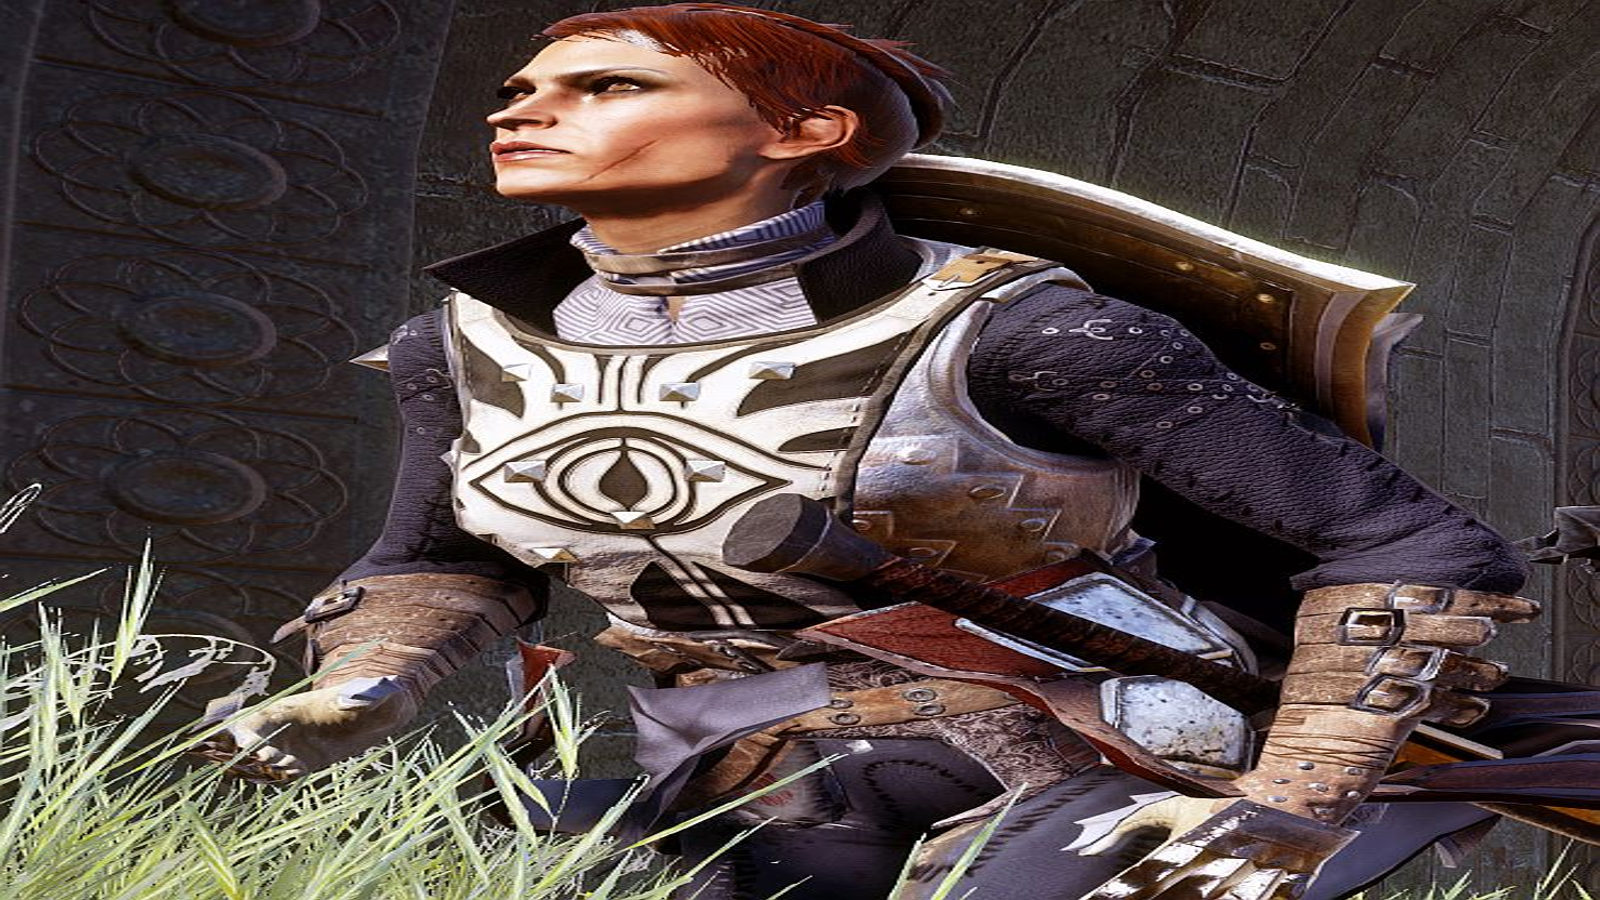 EA is giving away Dragon Age: Origins for free right now - Polygon